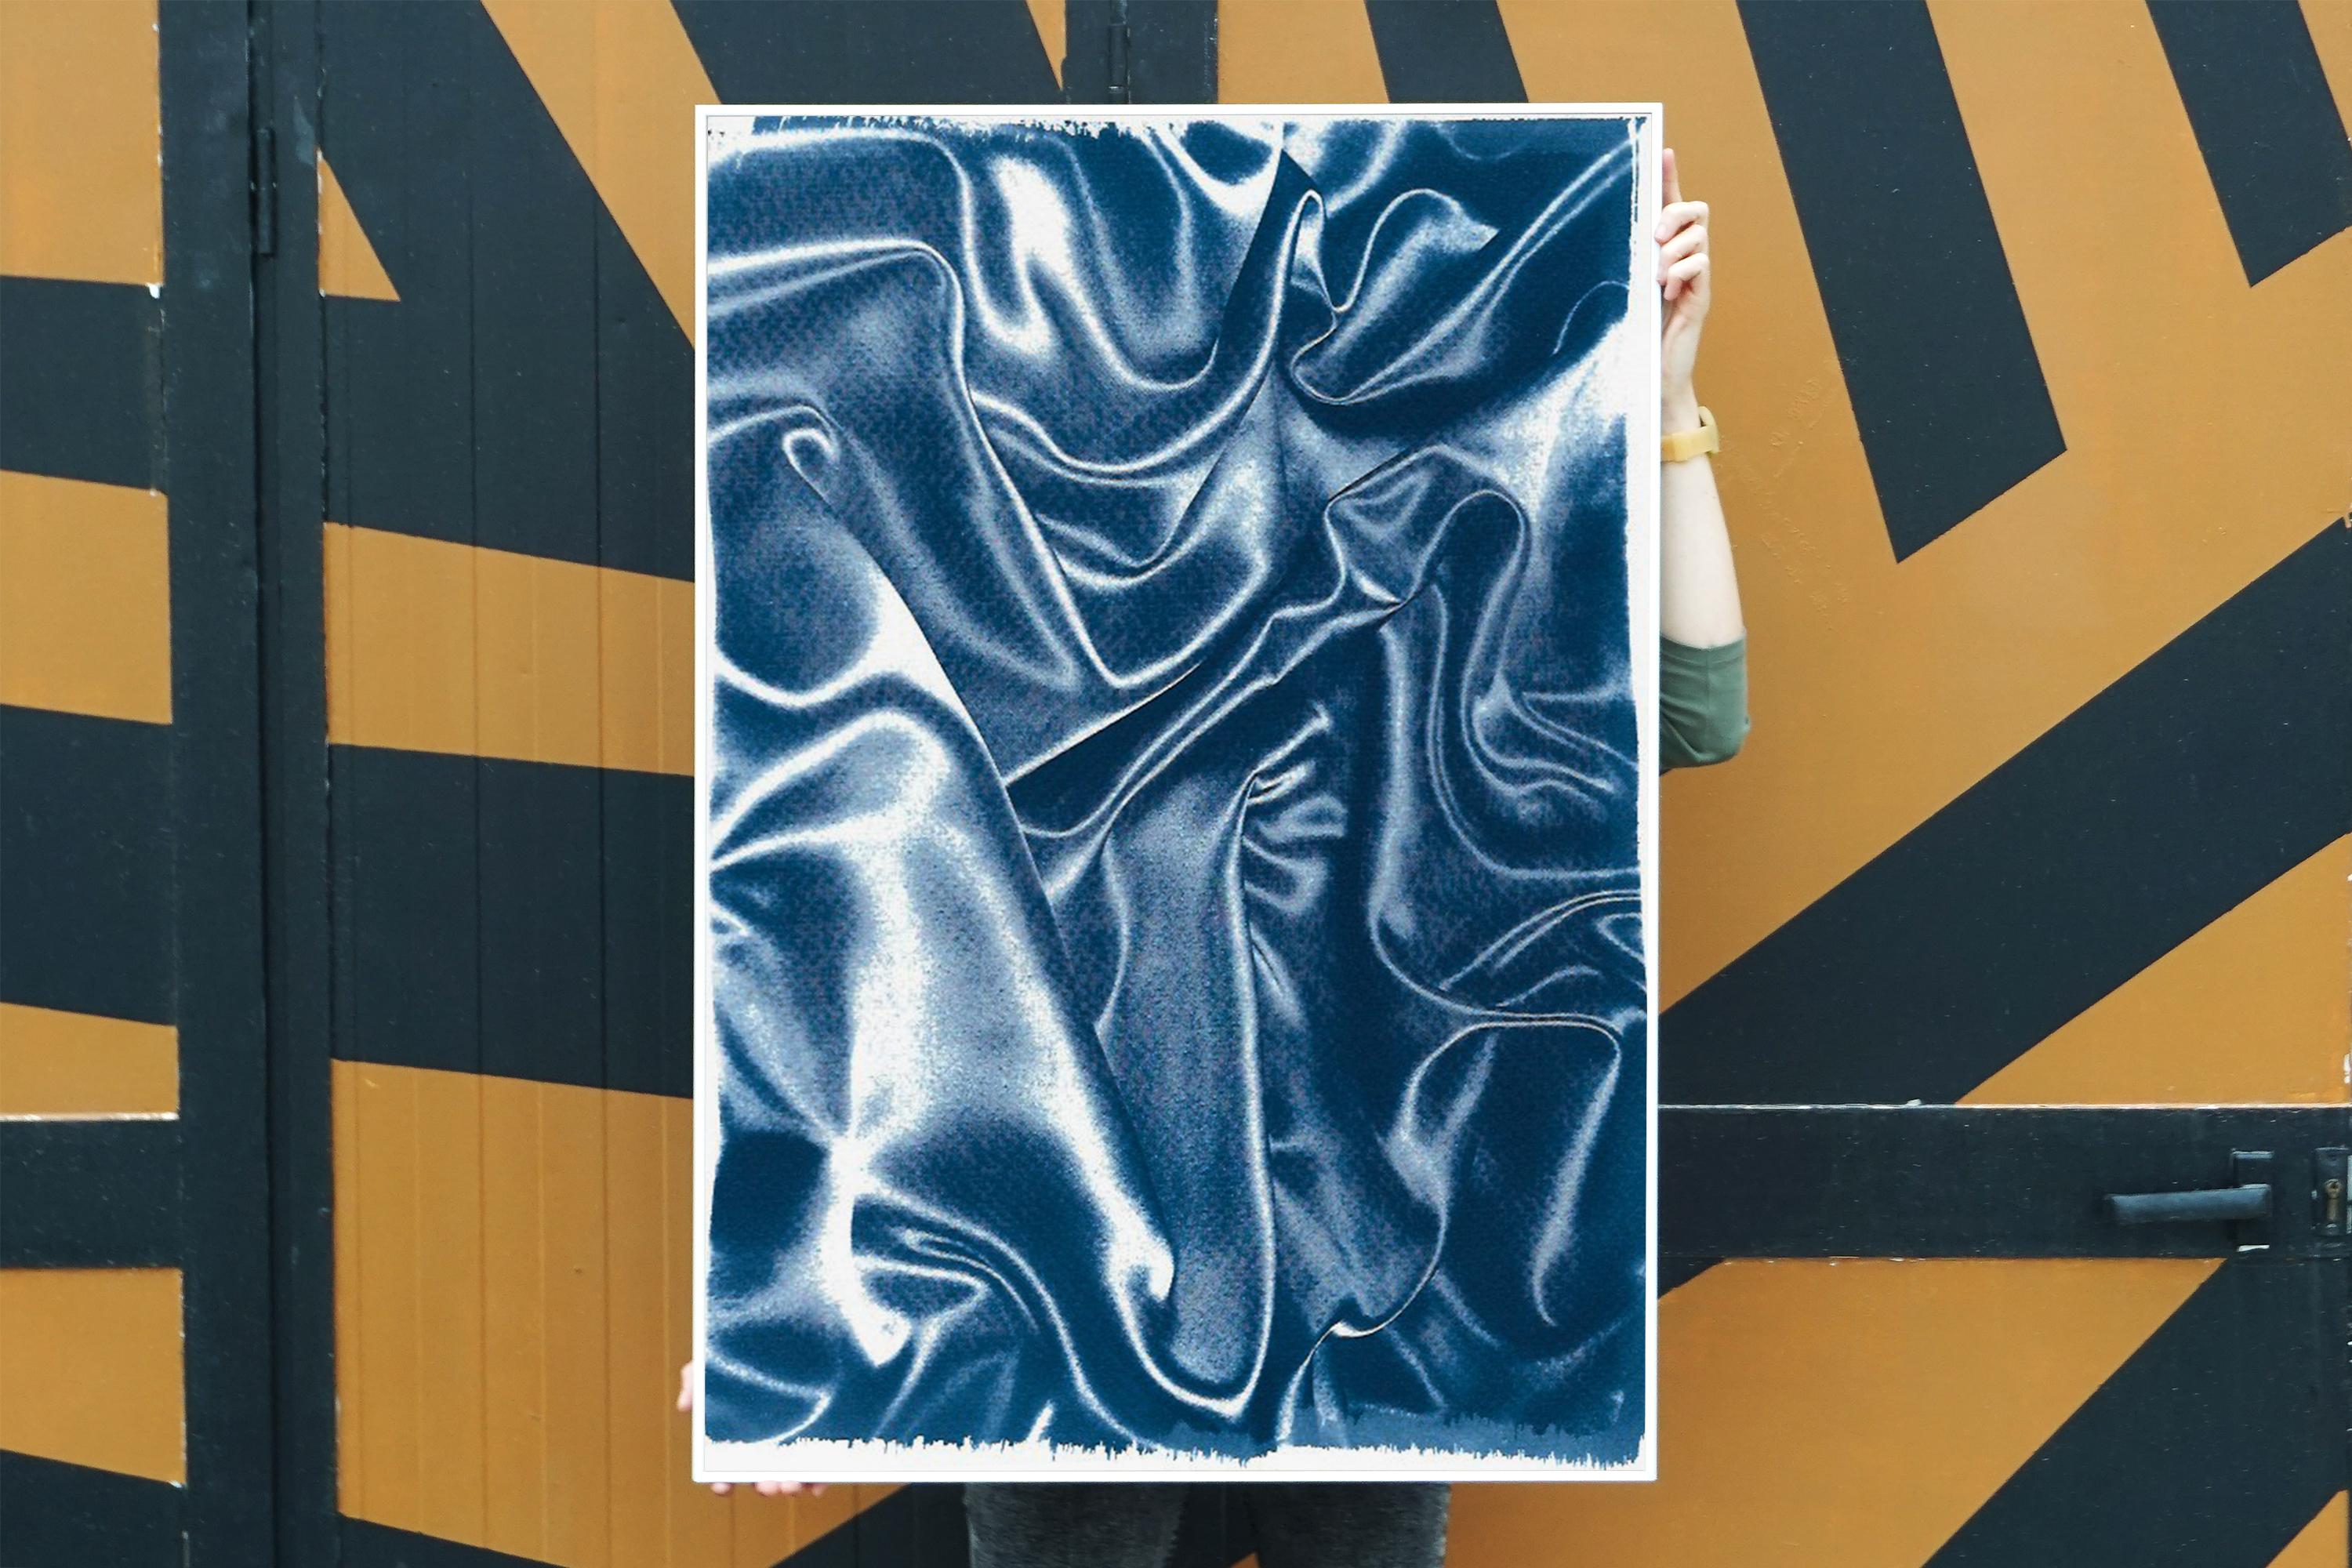 This is an exclusive handprinted limited edition cyanotype.

Details:
+ Title: Classic Blue Silk Movement nº1
+ Year: 2021
+ Edition Size: 100
+ Stamped and Certificate of Authenticity provided
+ Measurements : 70x100 cm (28x 40 in.), a standard